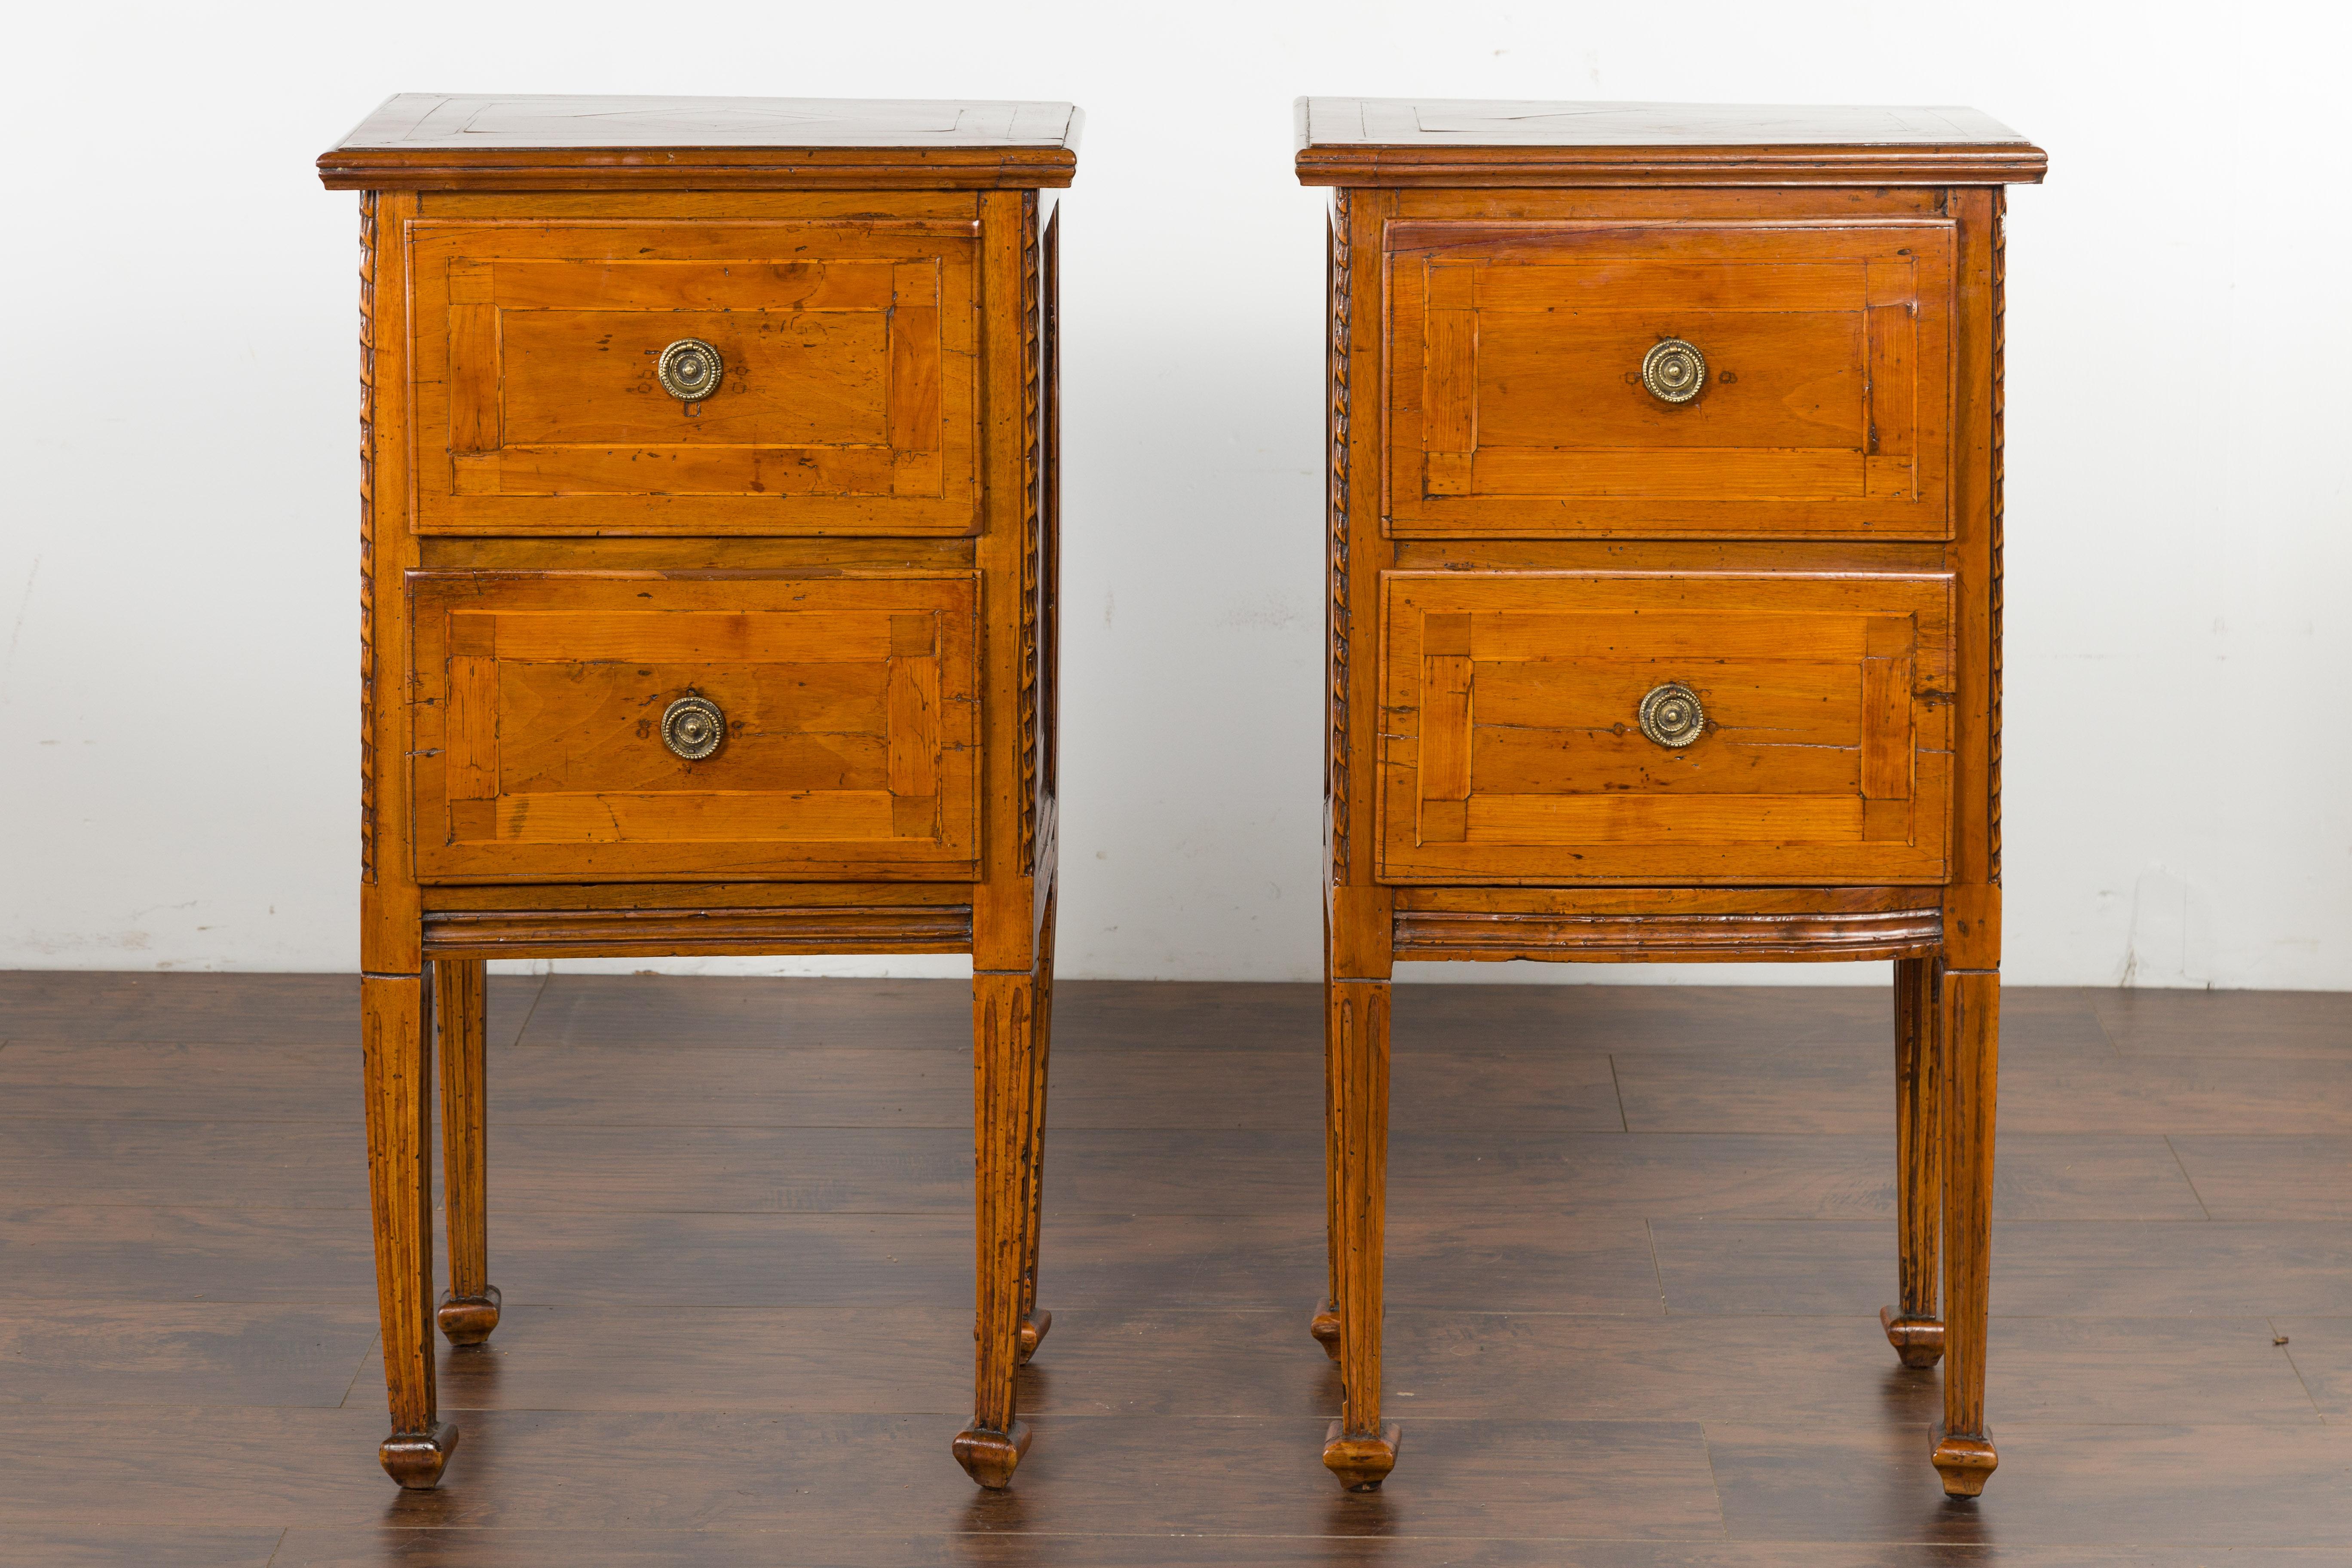 19th Century Pair of Italian 1820s Neoclassical Period Walnut Bedside Tables with Two Drawers For Sale